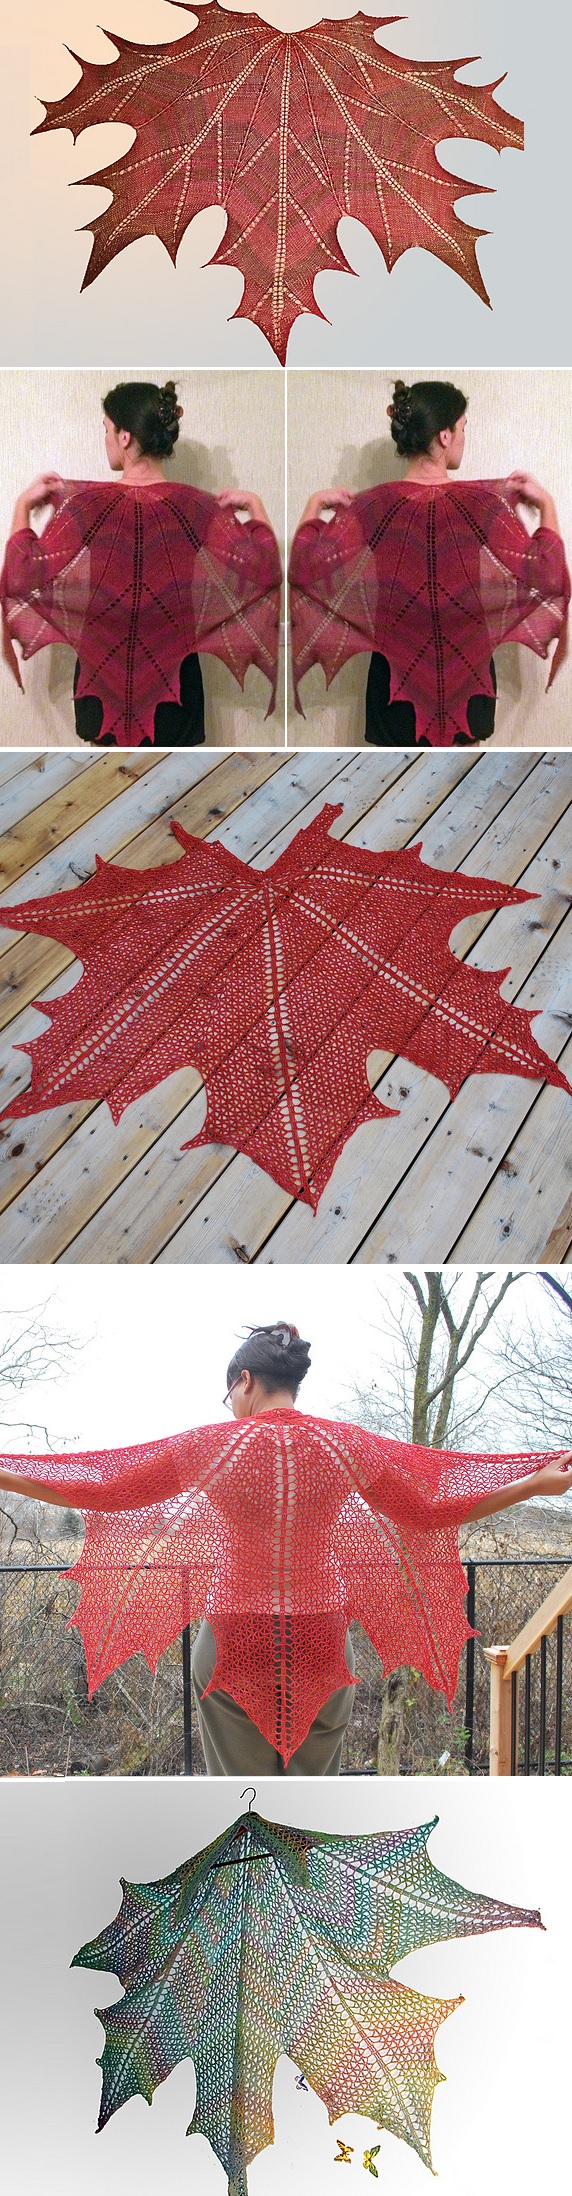 Knit and Crochet Meaple Leaf Shawl